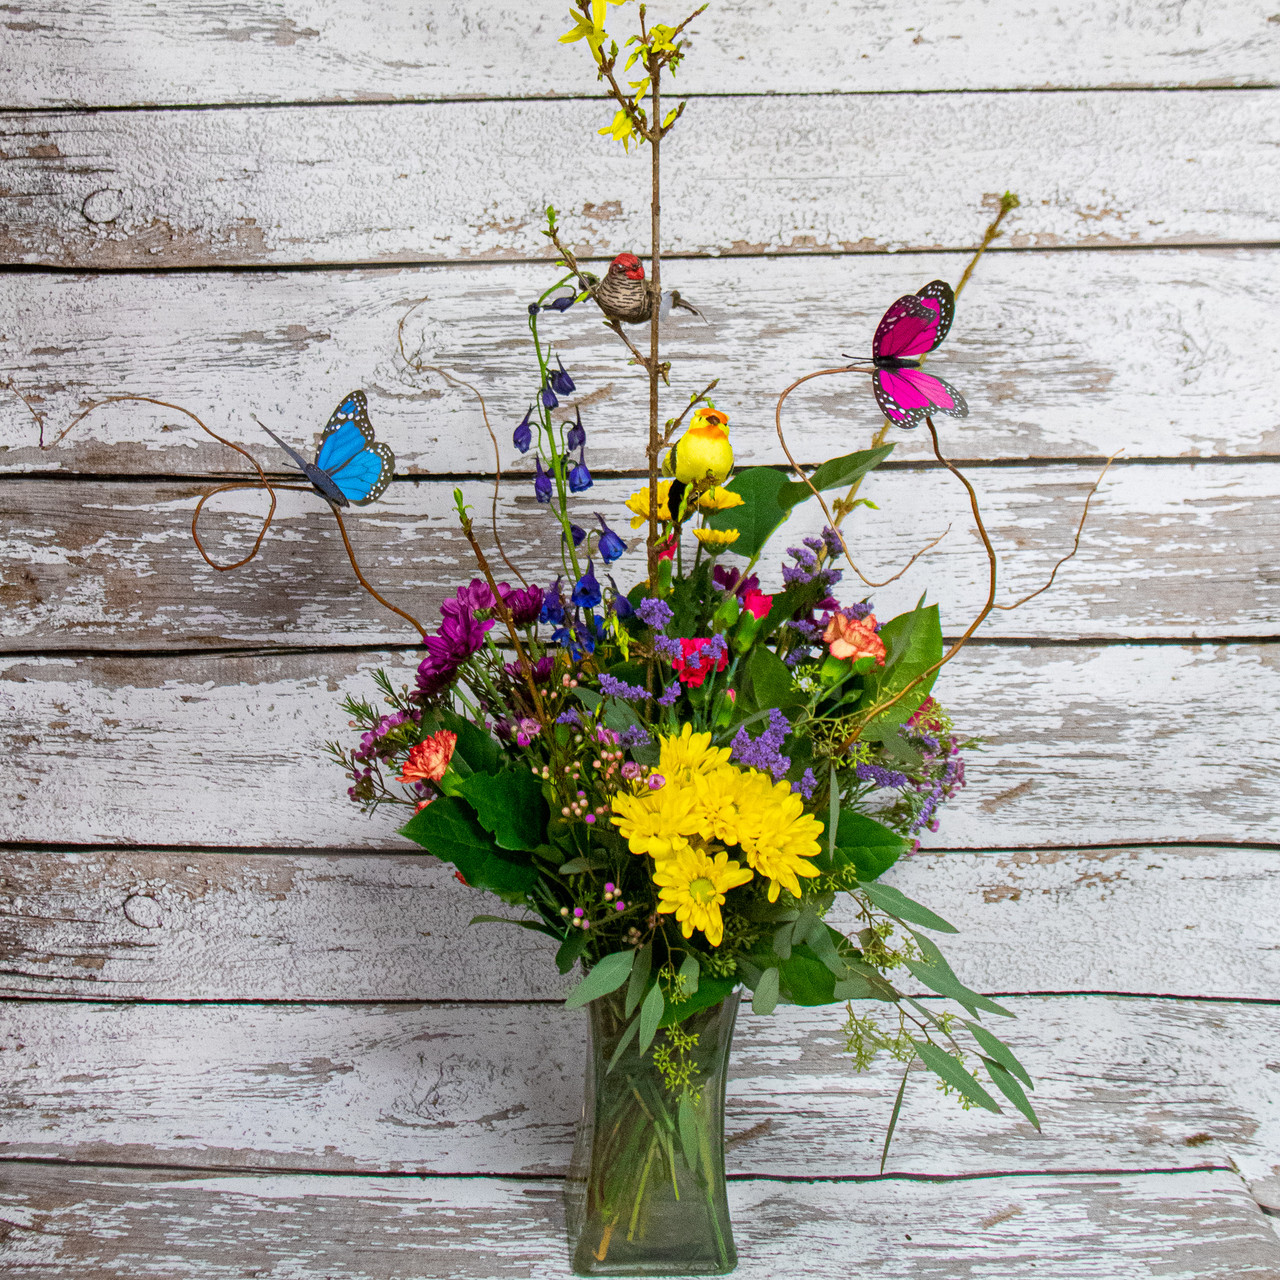 Butterfly Blossoms Bouquet flower arrangements delivered by